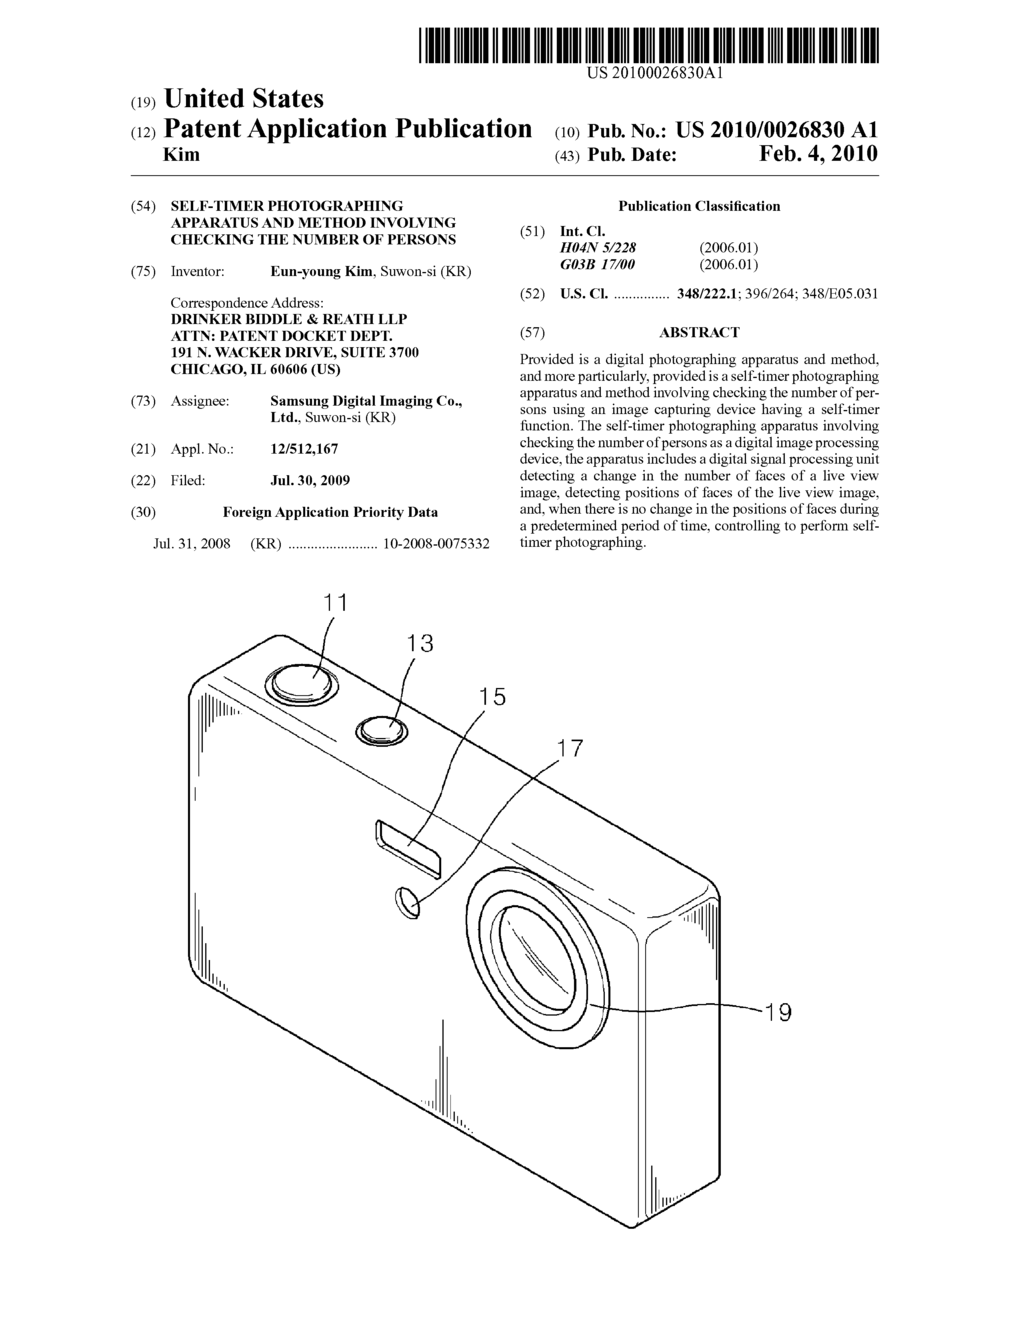 SELF-TIMER PHOTOGRAPHING APPARATUS AND METHOD INVOLVING CHECKING THE NUMBER OF PERSONS - diagram, schematic, and image 01